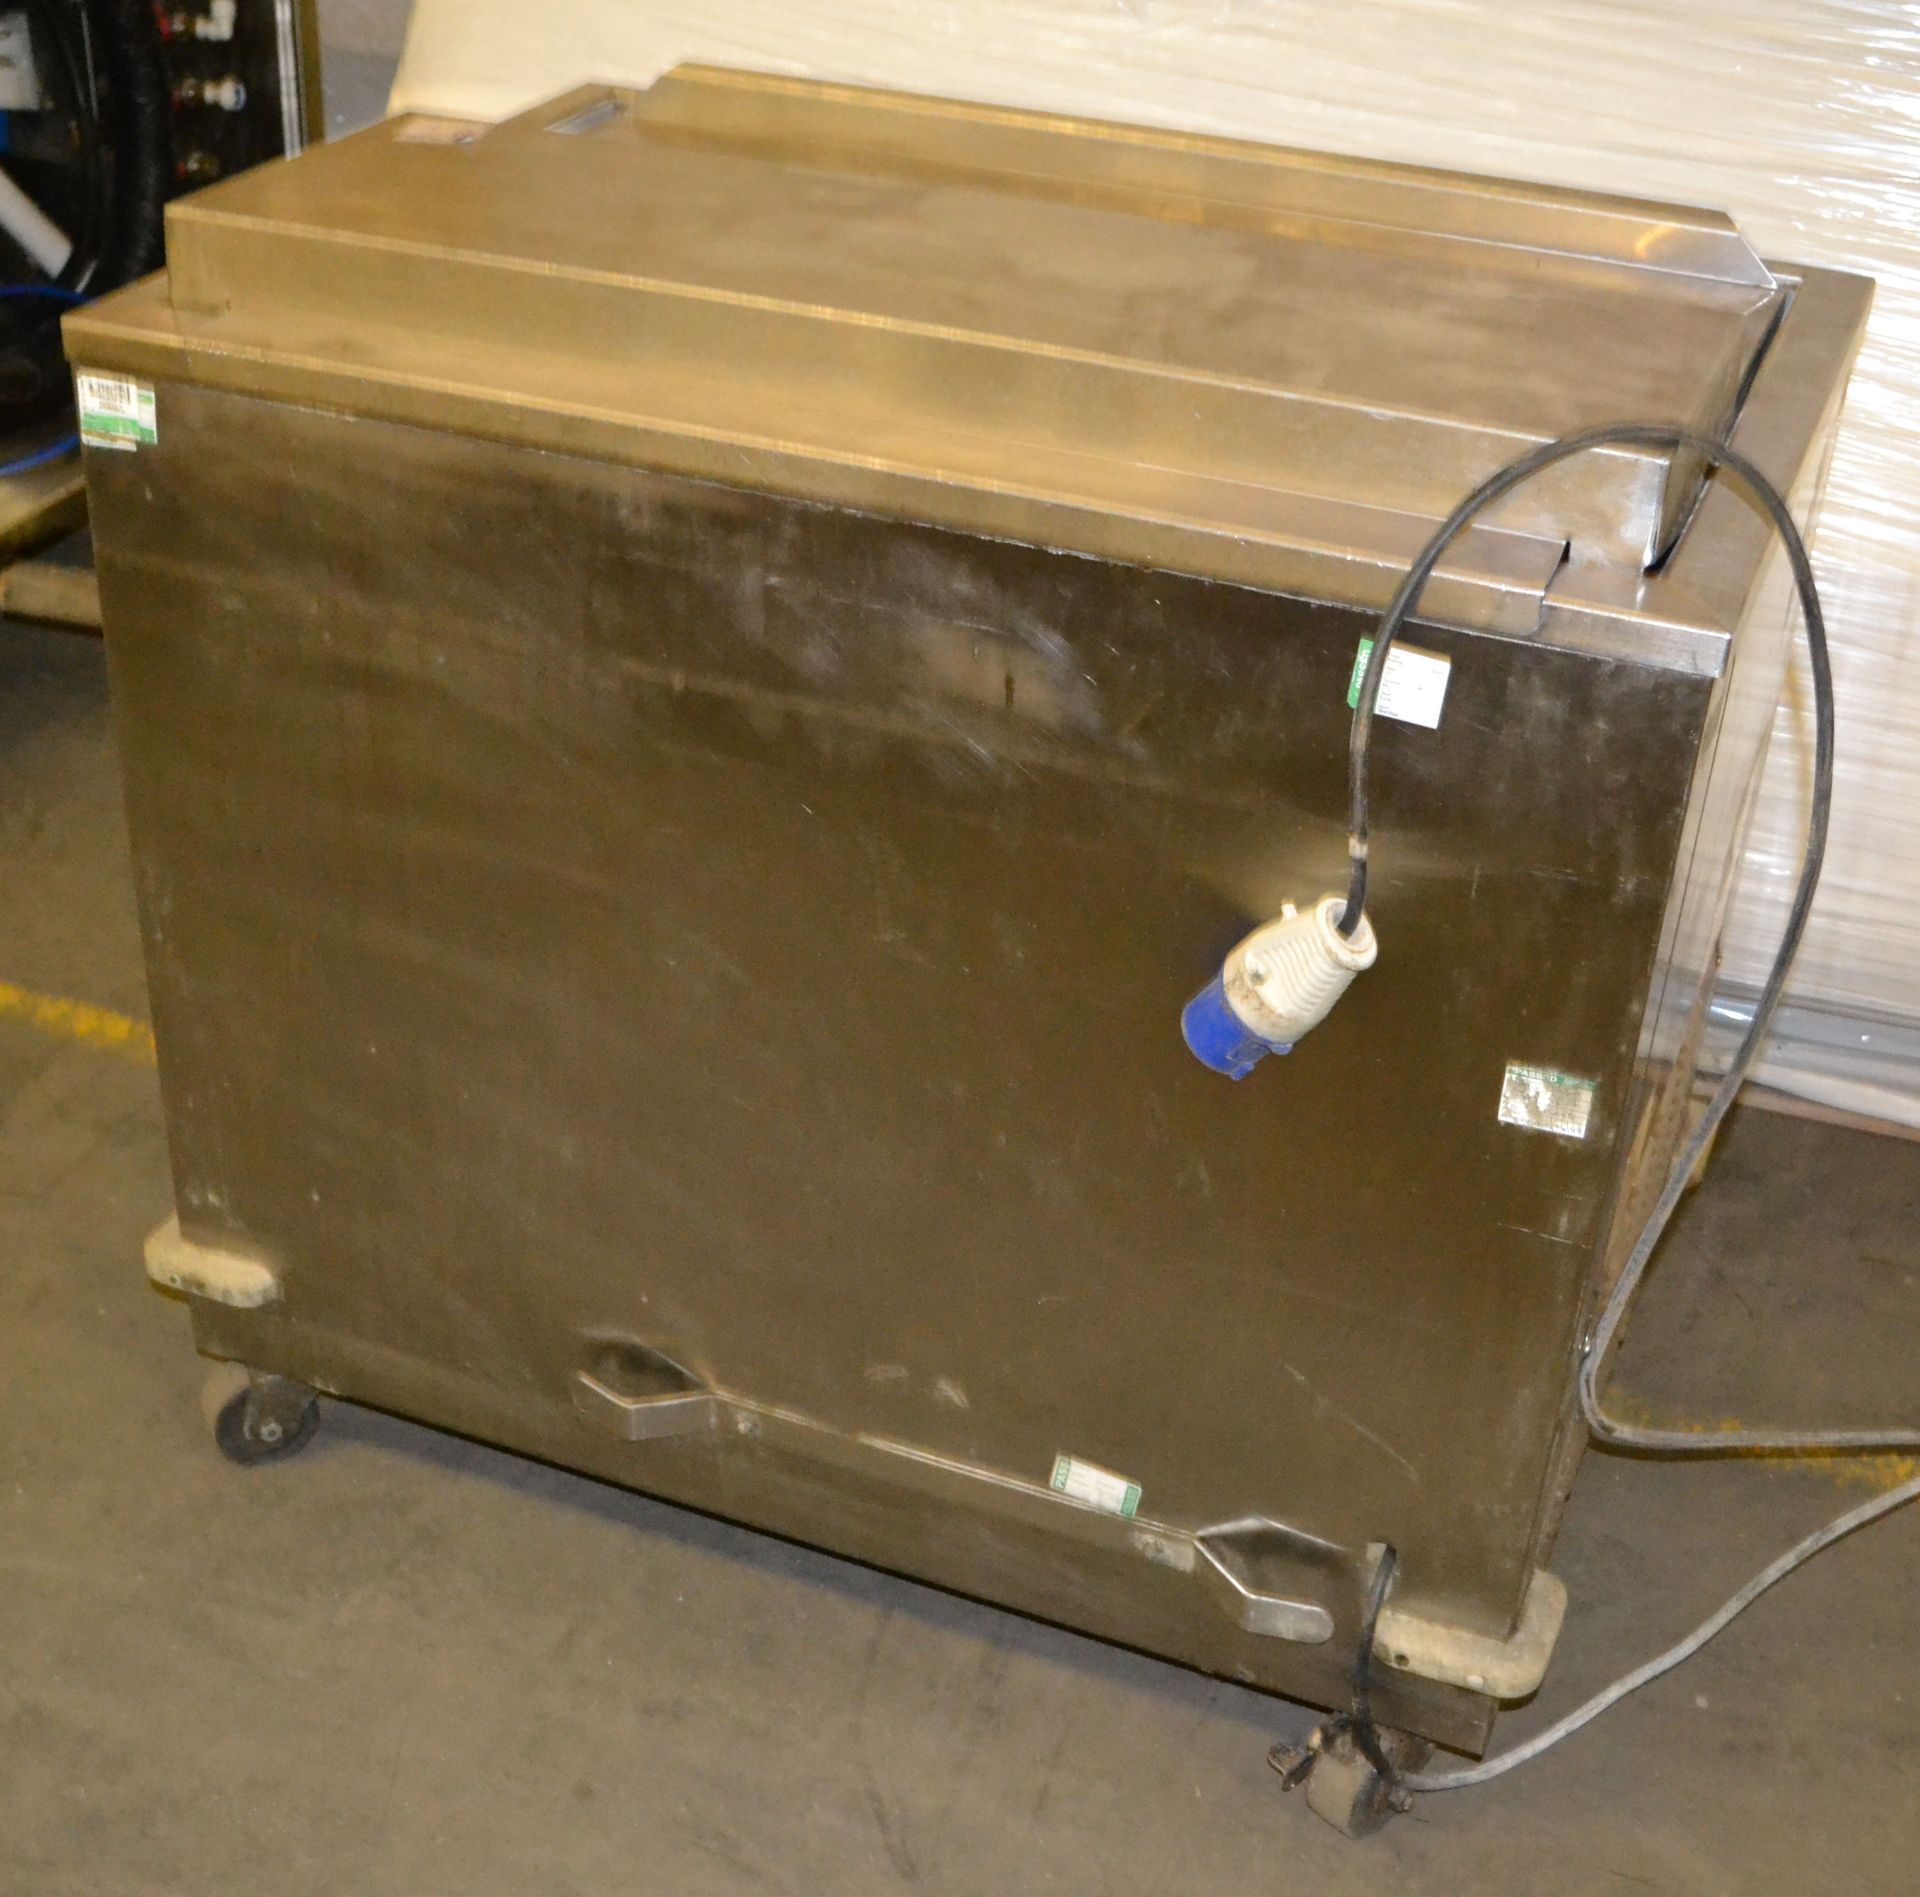 1 x Top Loading Chiller on Wheels - Ref:NCE030 - CL007 - Location: Bolton BL1 Approximate dimension - Image 7 of 8